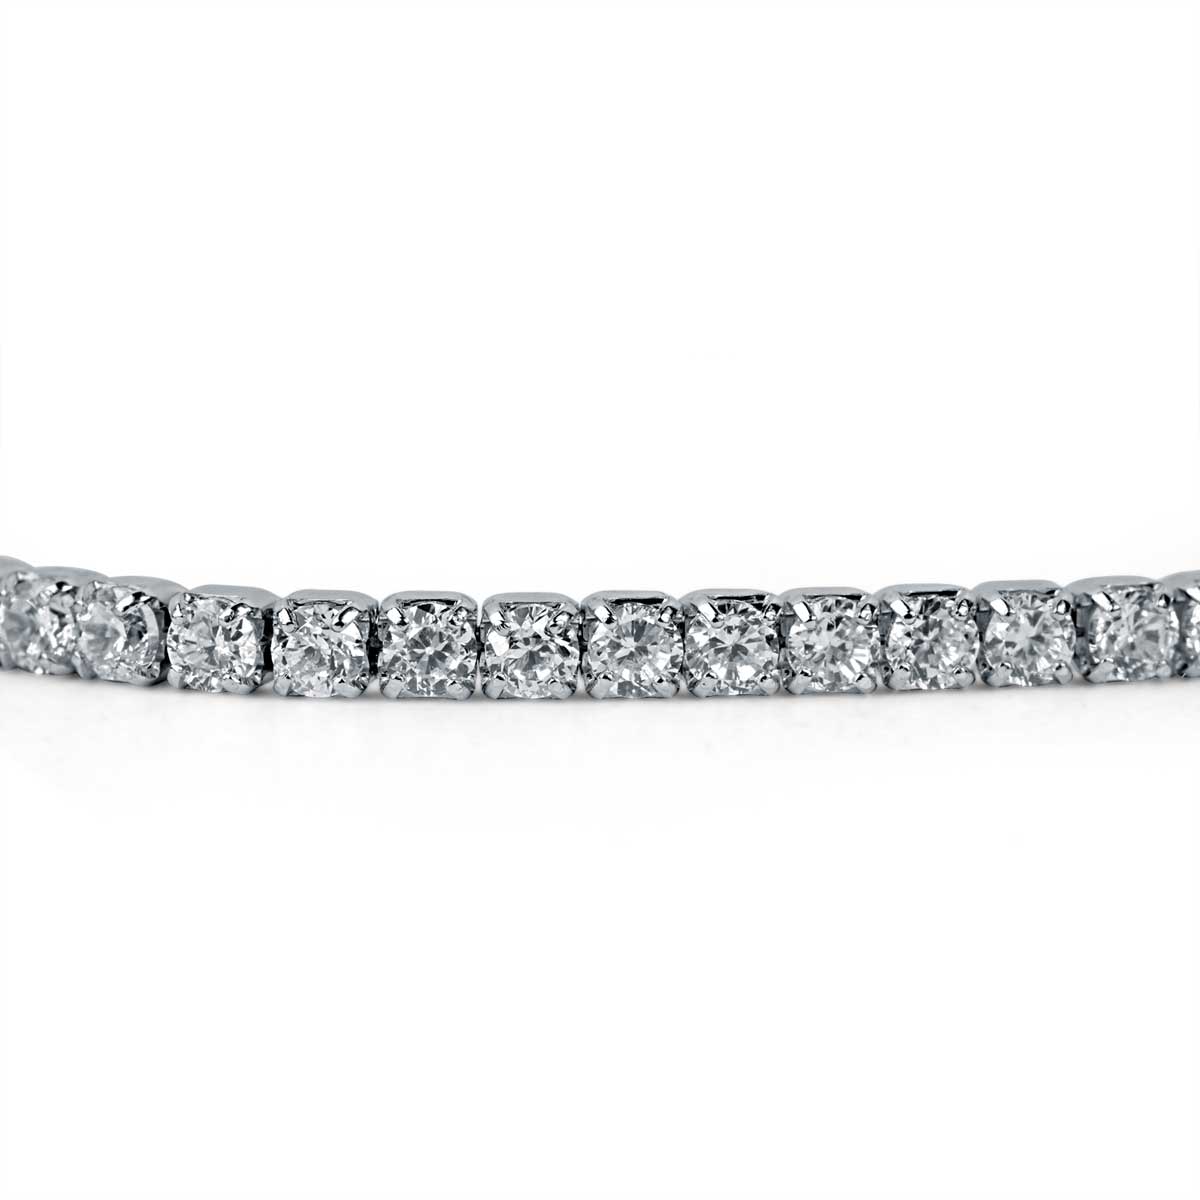 Discover the elegance of our White Desire Sterling Silver Bracelet for Women. Crafted with fine sterling silver and a rhodium finish, this bracelet showcases stunning zirconia stones that add a glamorous touch to any outfit. Perfect for adding a touch of sophistication to your everyday look.